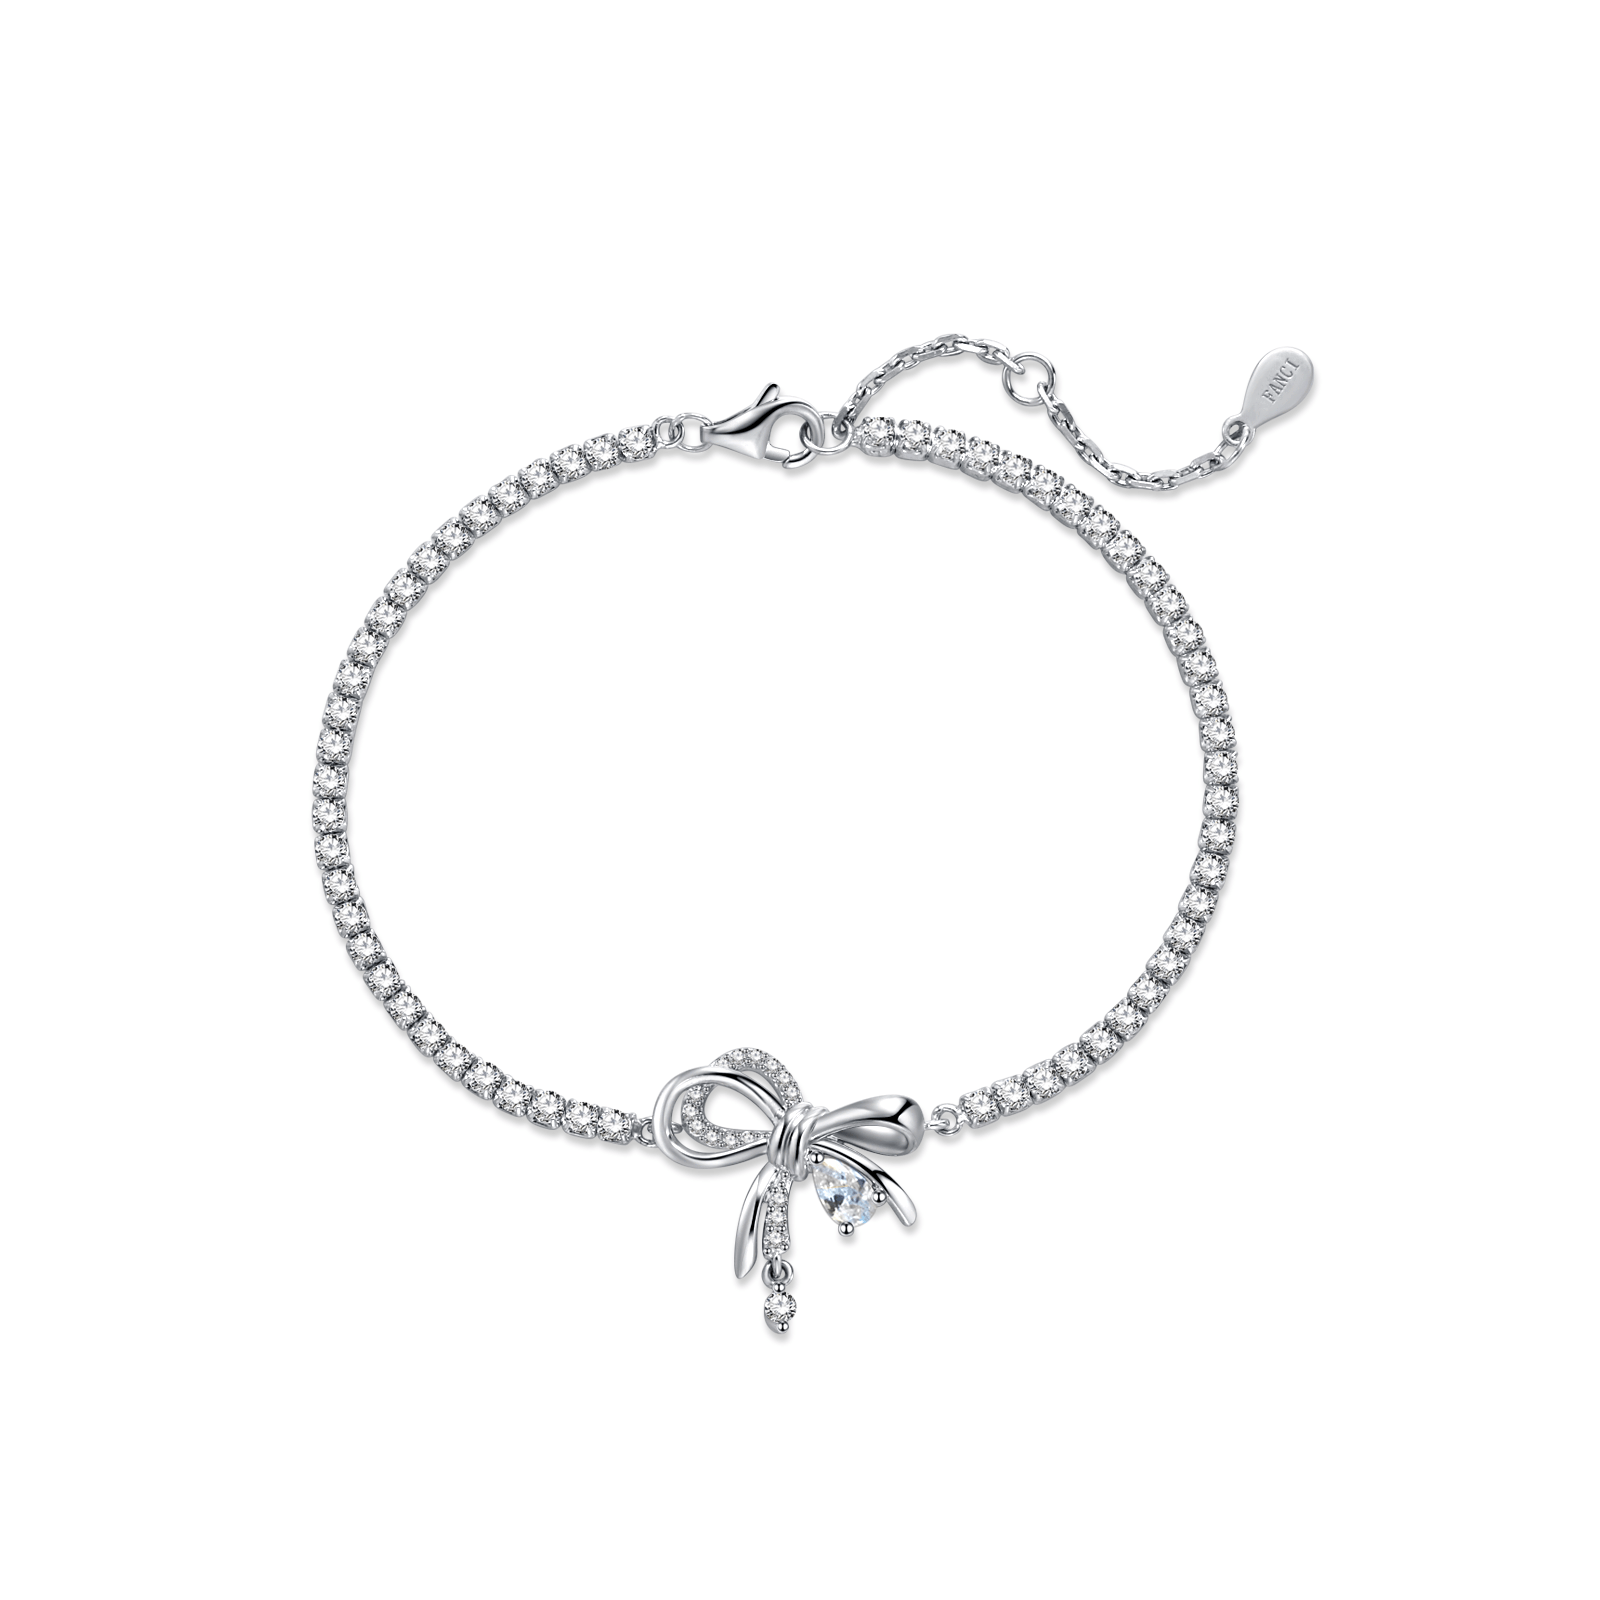 FANCIME “My Fairy Lady” Sterling Silver Sweet Bow White Stone Tennis Bracelet